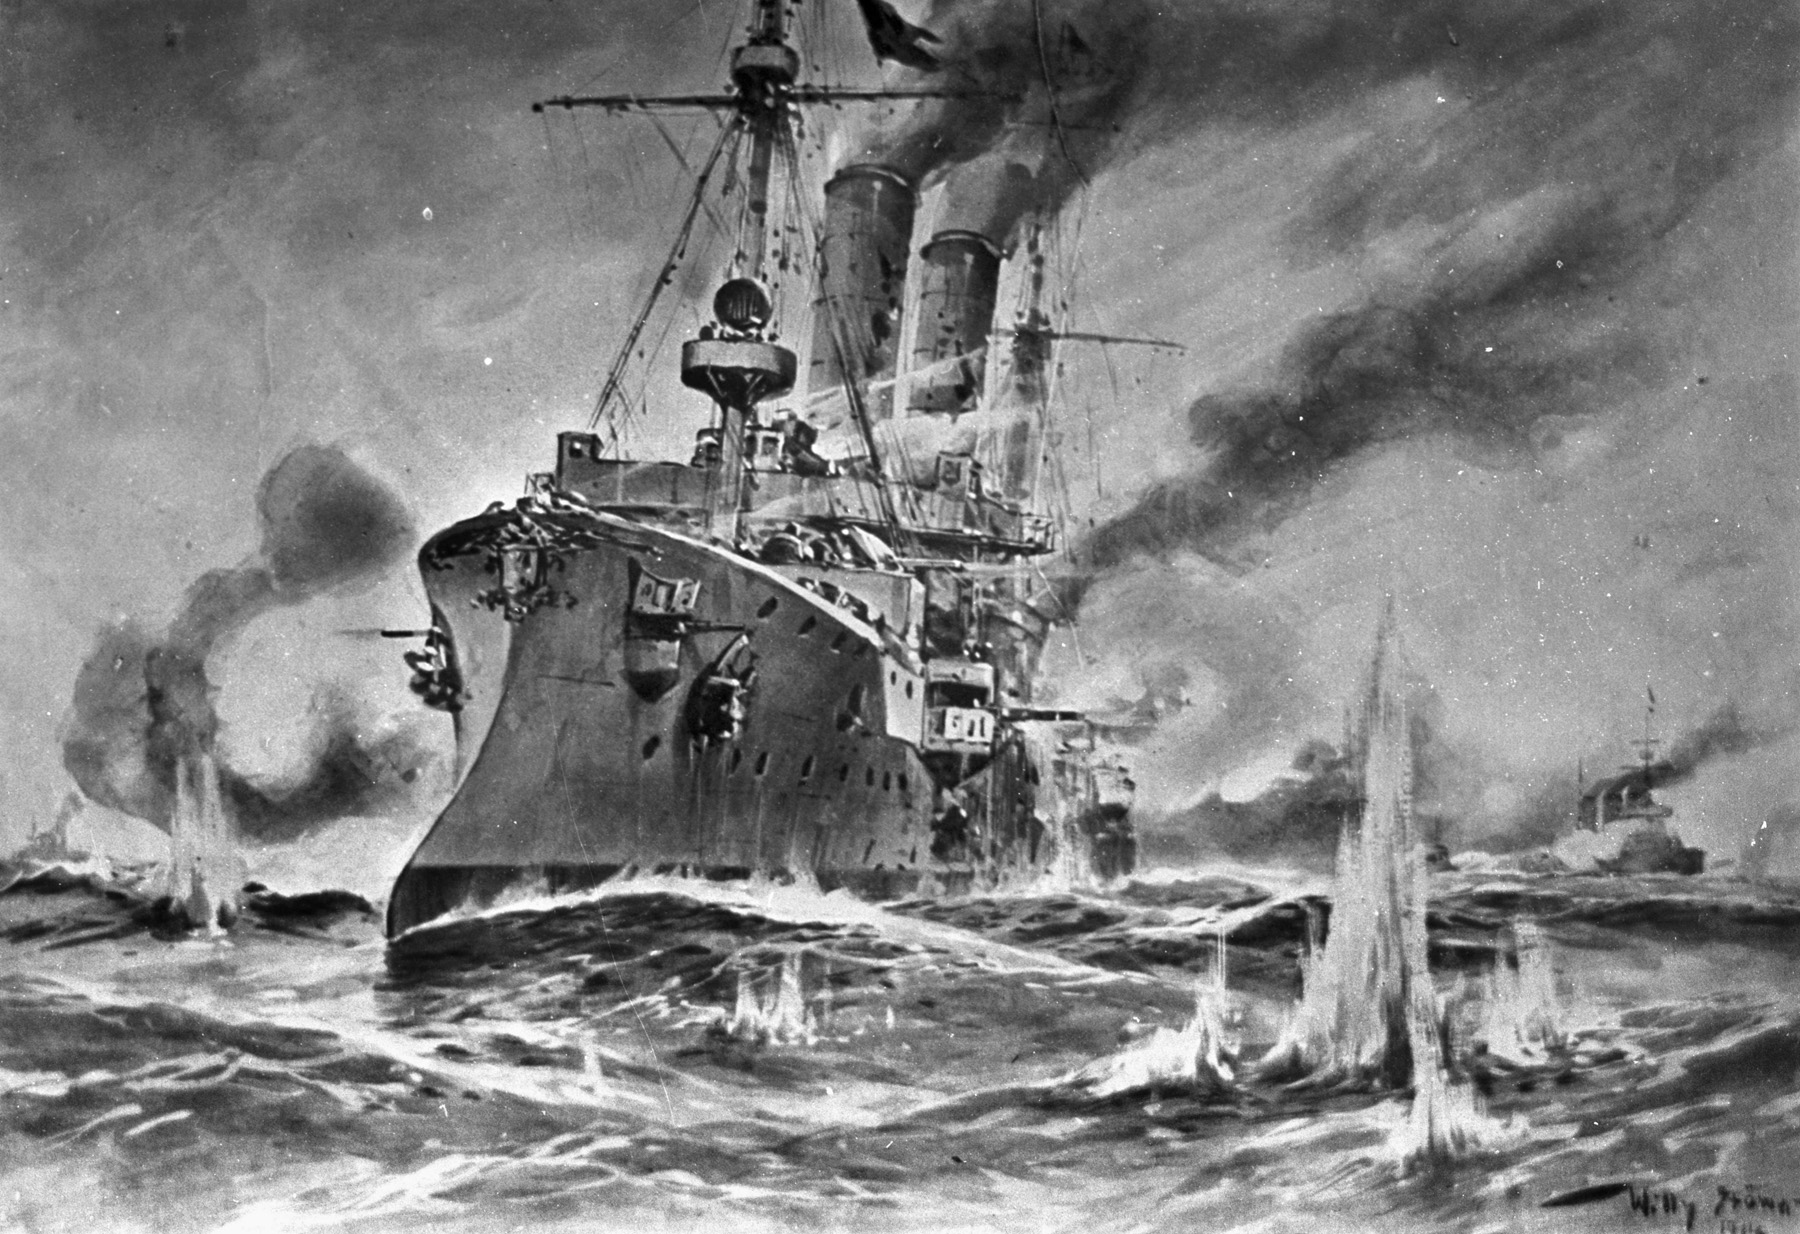 Shells explode around the German cruiser SMS Ariadne in this dramatic illustration. In the aftermath of the British victory, the Germans became overly cautious.